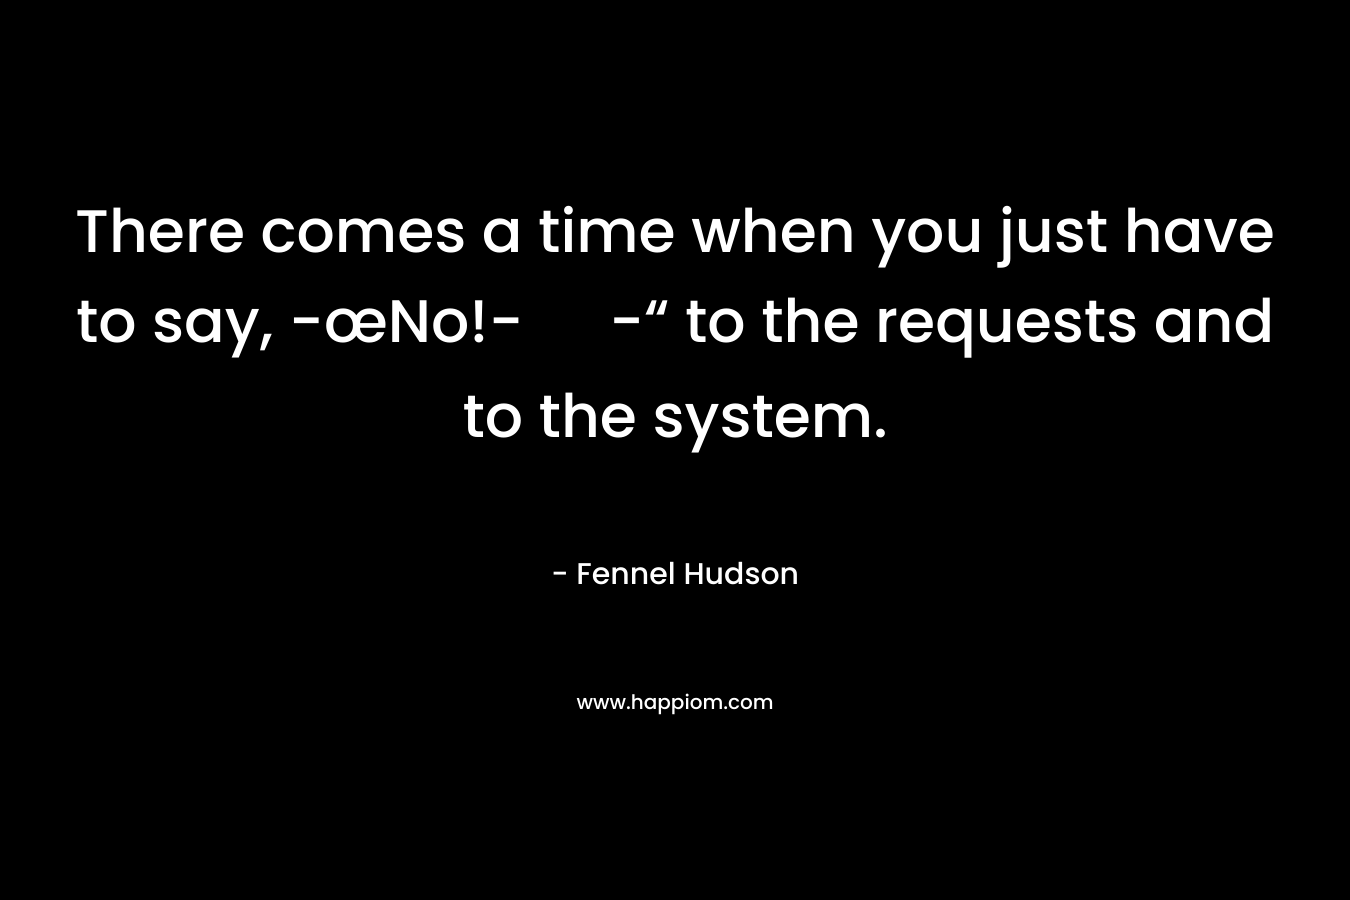 There comes a time when you just have to say, -œNo!- -“ to the requests and to the system.